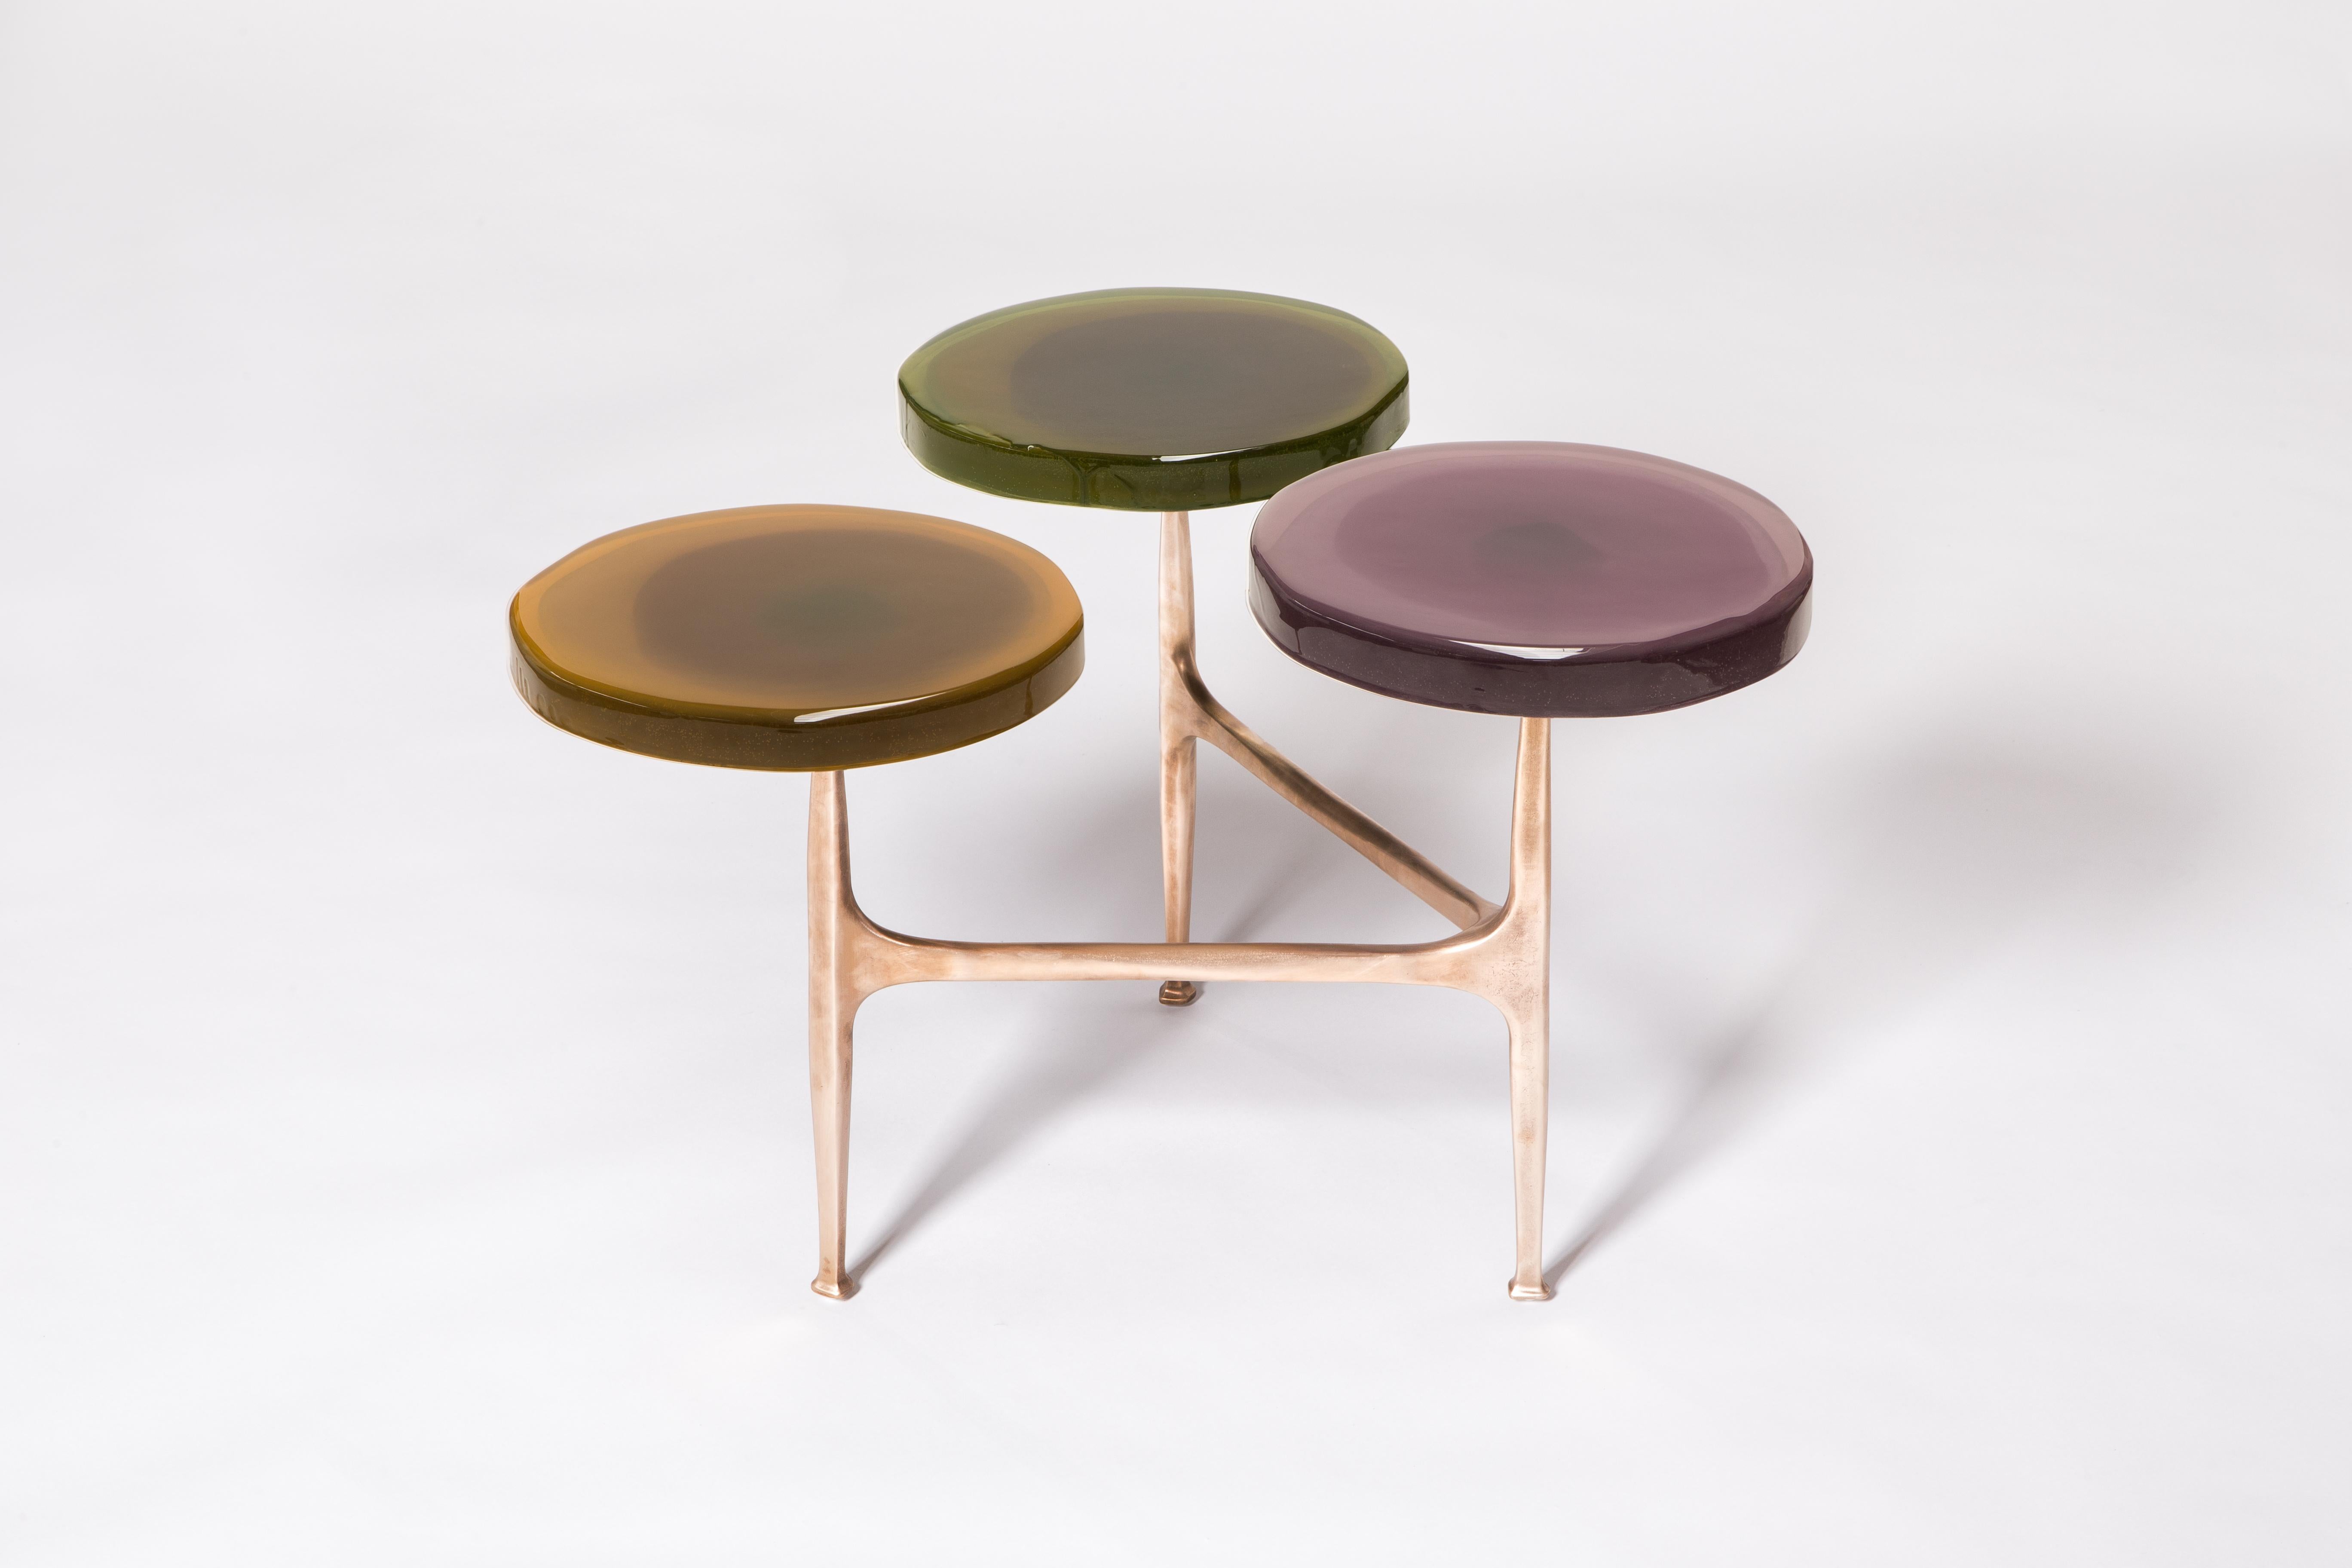 3 Tops Agatha coffee table by Draga & Aurel
Dimensions: W 121 x D 80 x H 50 cm
 Top Ø 32/40 cm
Materials: Resin and bronze

The Agatha coffee tables are featured by irregular circular tops of transparent and
colorful resin sit on a bronze